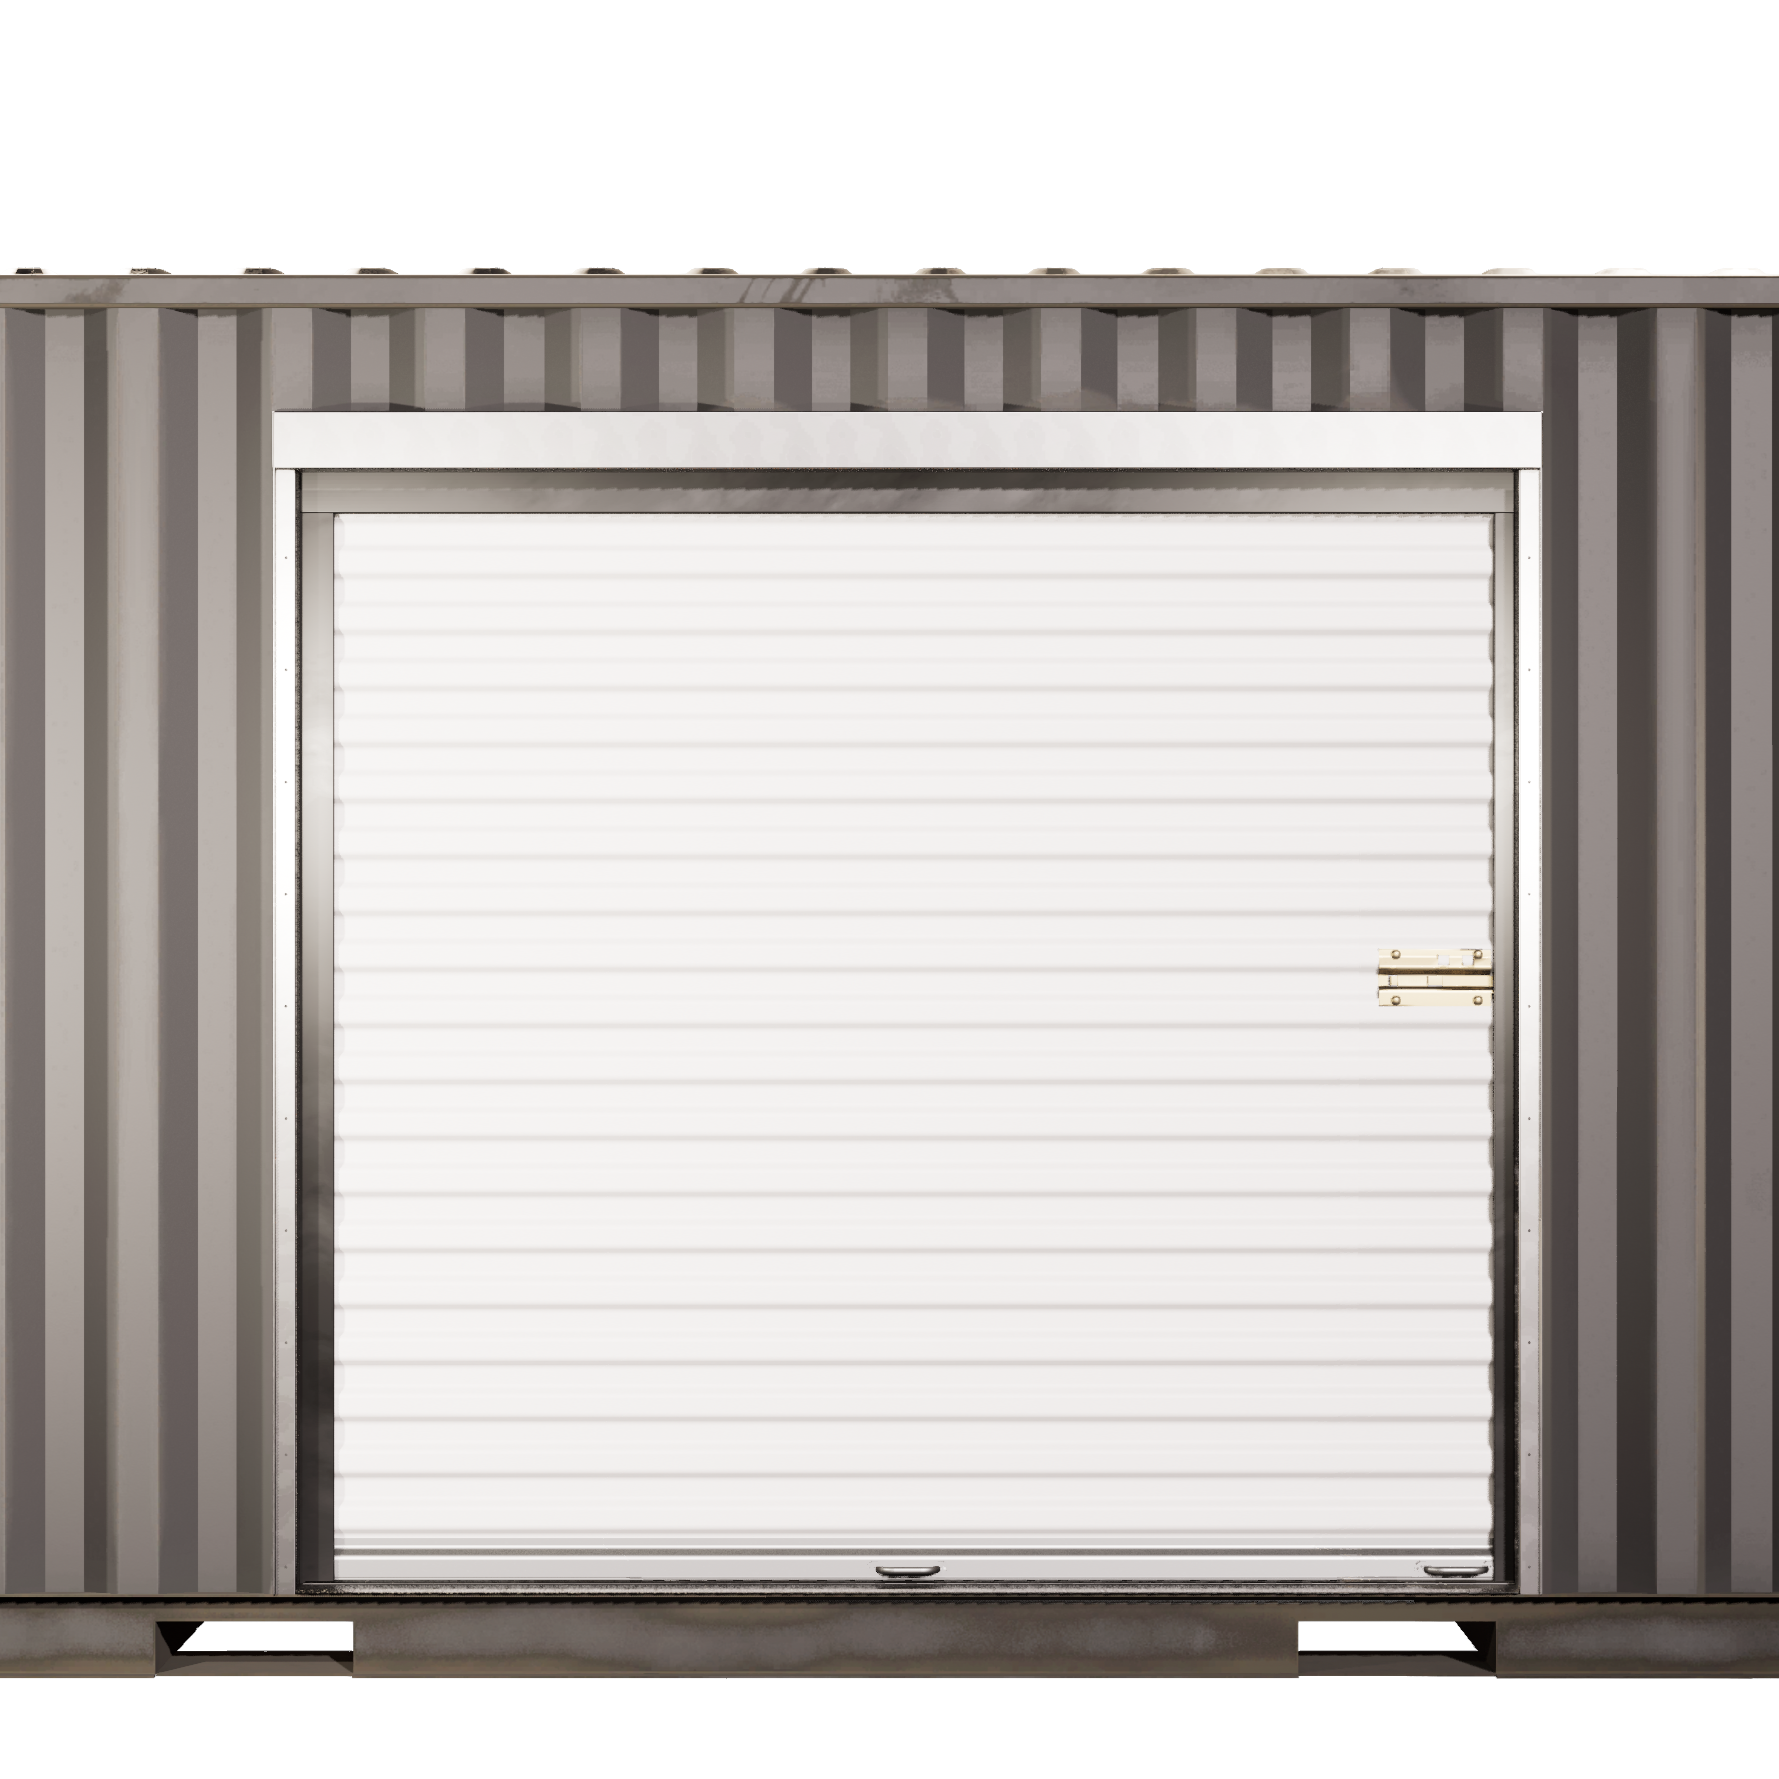 Standard (8'6" Tall) Side Wall Roll Up Door Framing Kits - Door Not Included (Please contact us before placing order so we can provide accurate shipping quote)